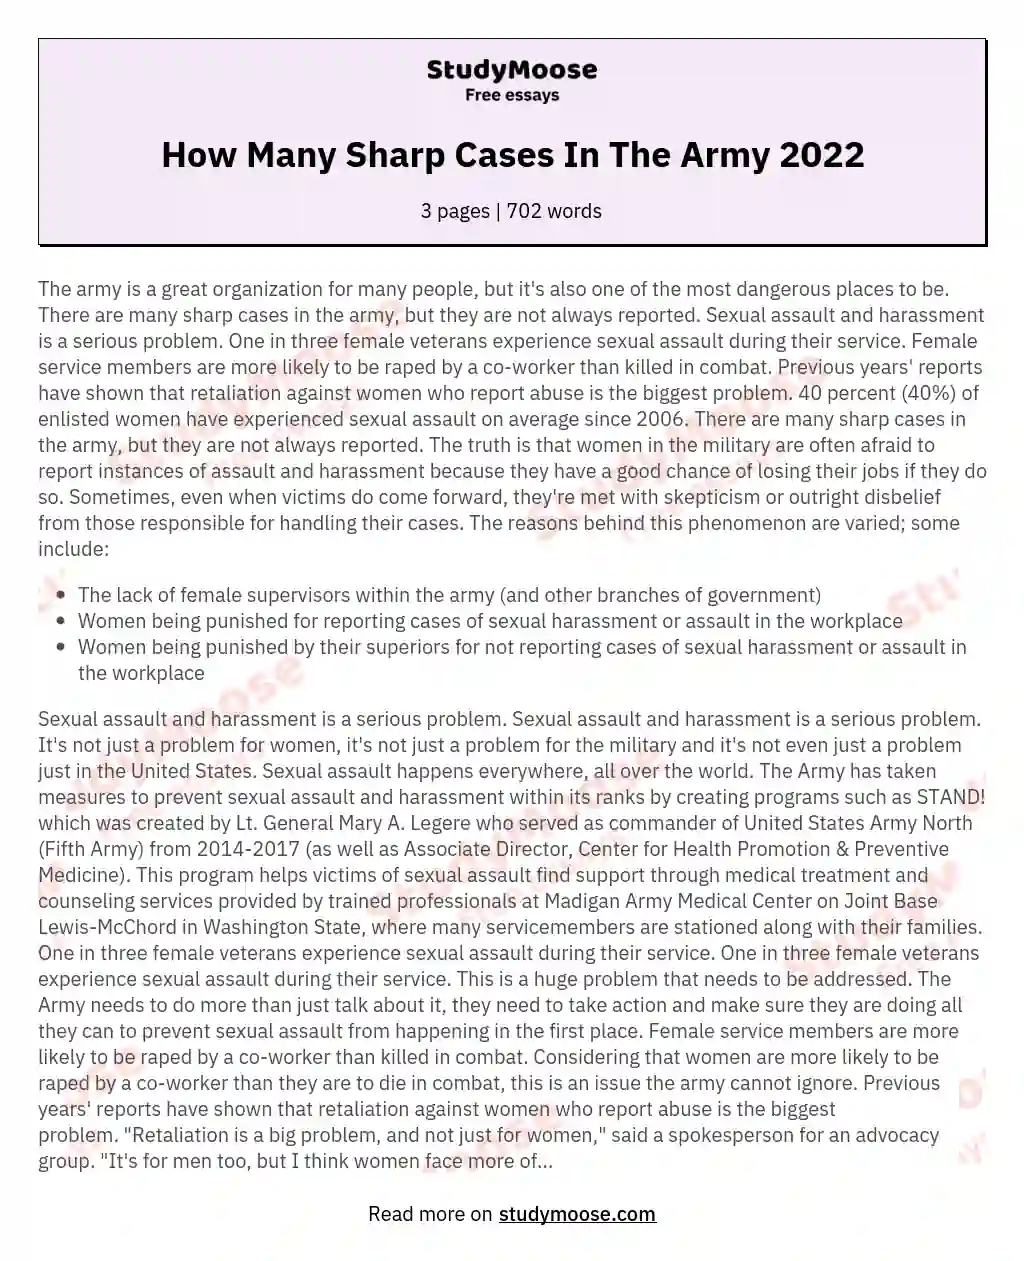 How Many Sharp Cases In The Army 2022 essay